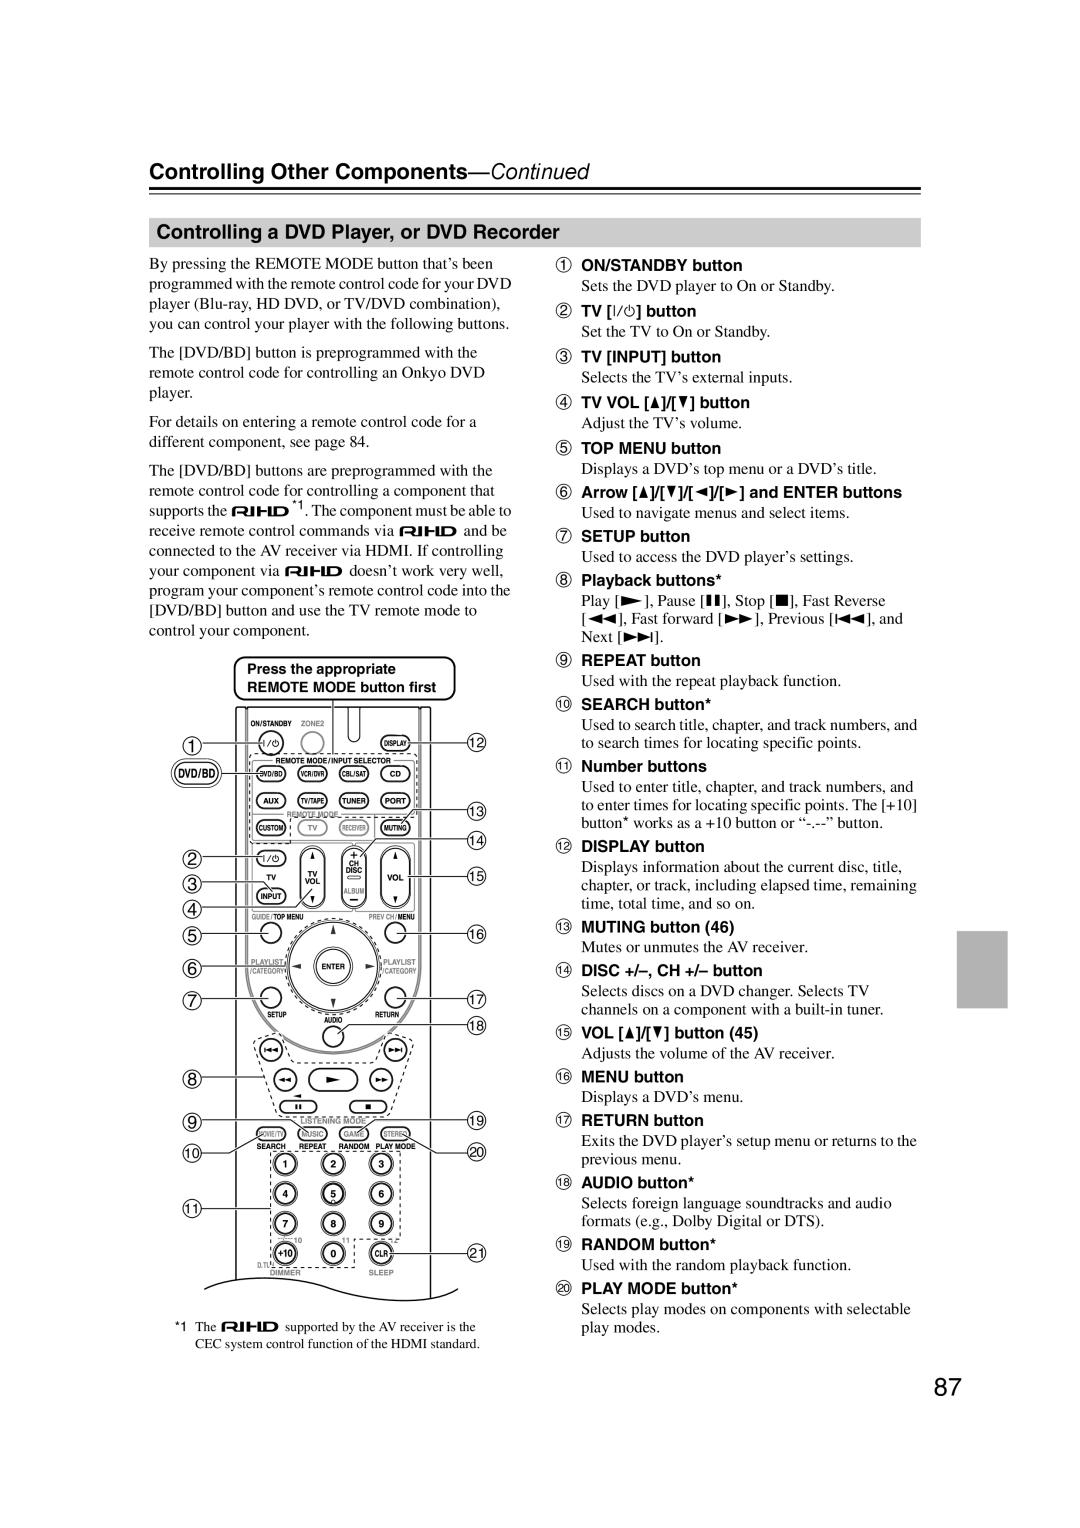 Onkyo SR507, TX-SR577 instruction manual Controlling a DVD Player, or DVD Recorder, Controlling Other Components—Continued 